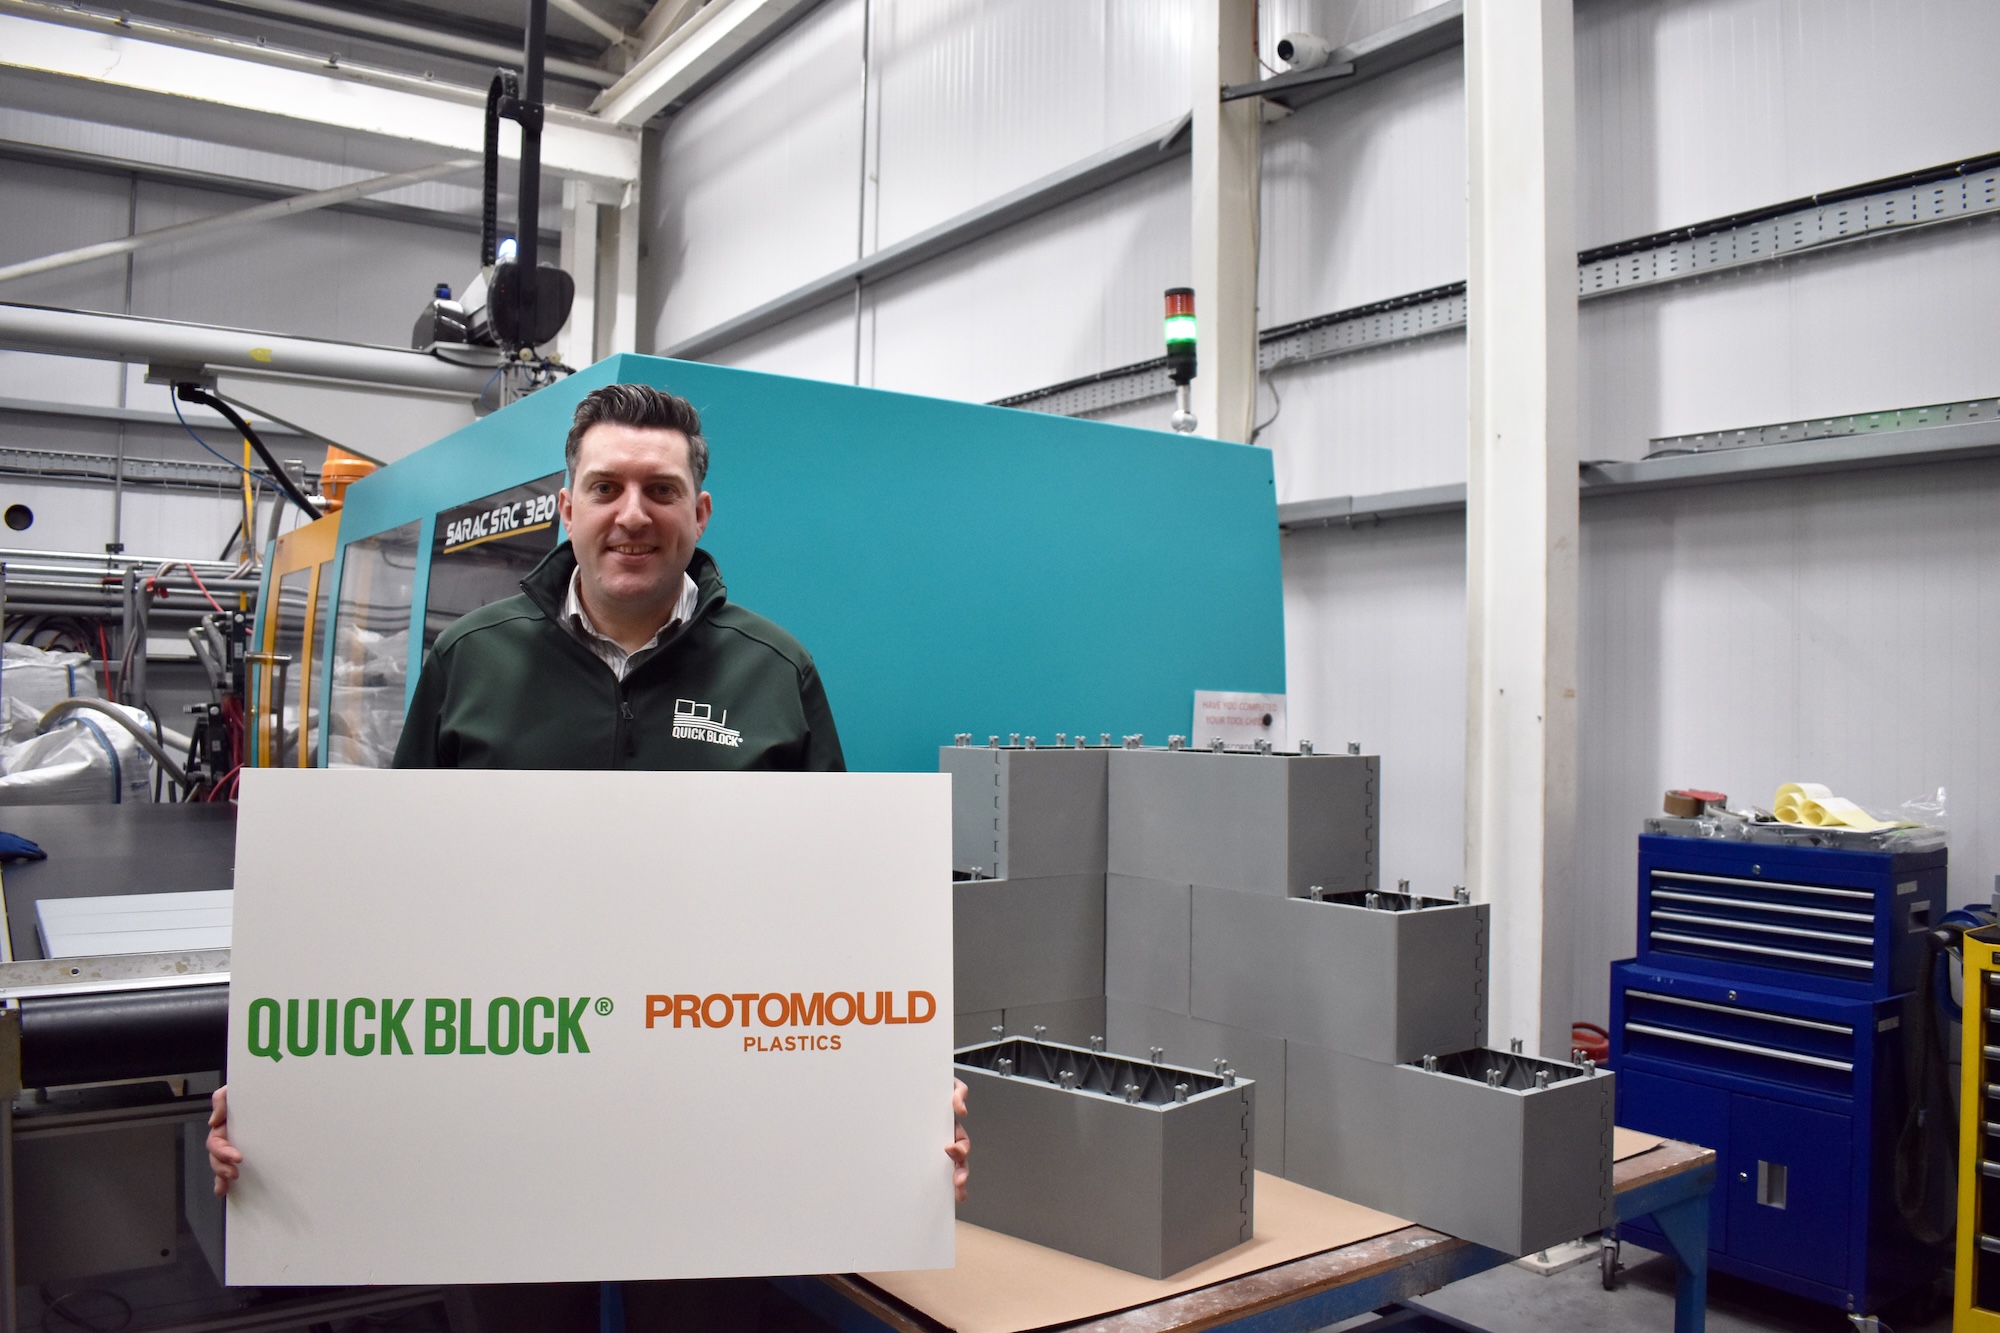 QUICKBLOCK's sustainable construction solutions attract £1.3m investment